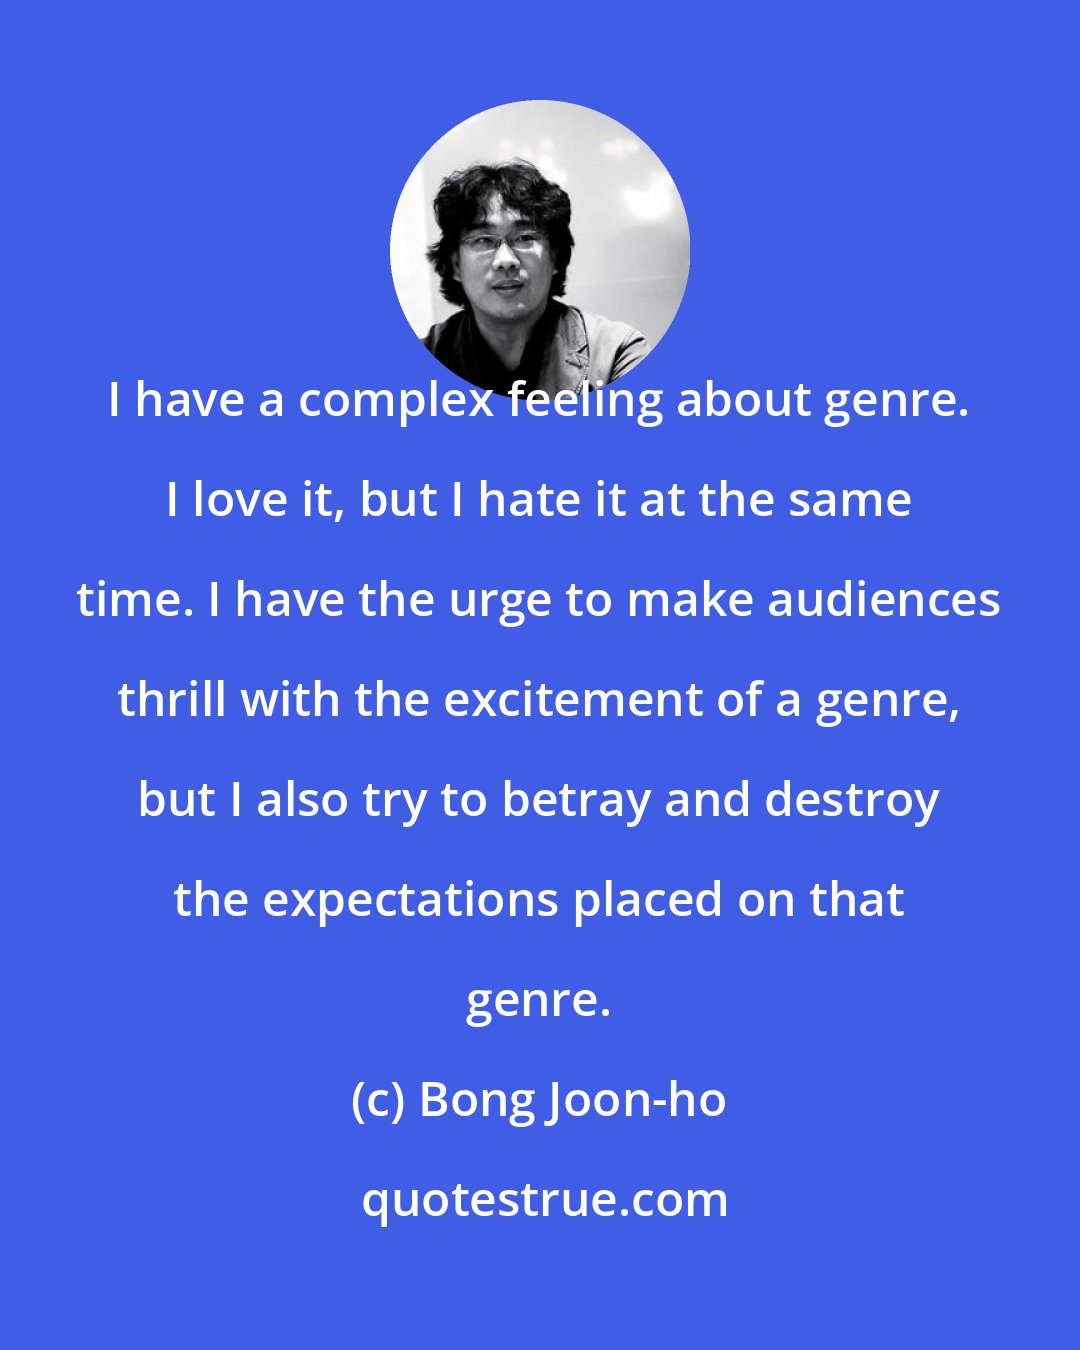 Bong Joon-ho: I have a complex feeling about genre. I love it, but I hate it at the same time. I have the urge to make audiences thrill with the excitement of a genre, but I also try to betray and destroy the expectations placed on that genre.